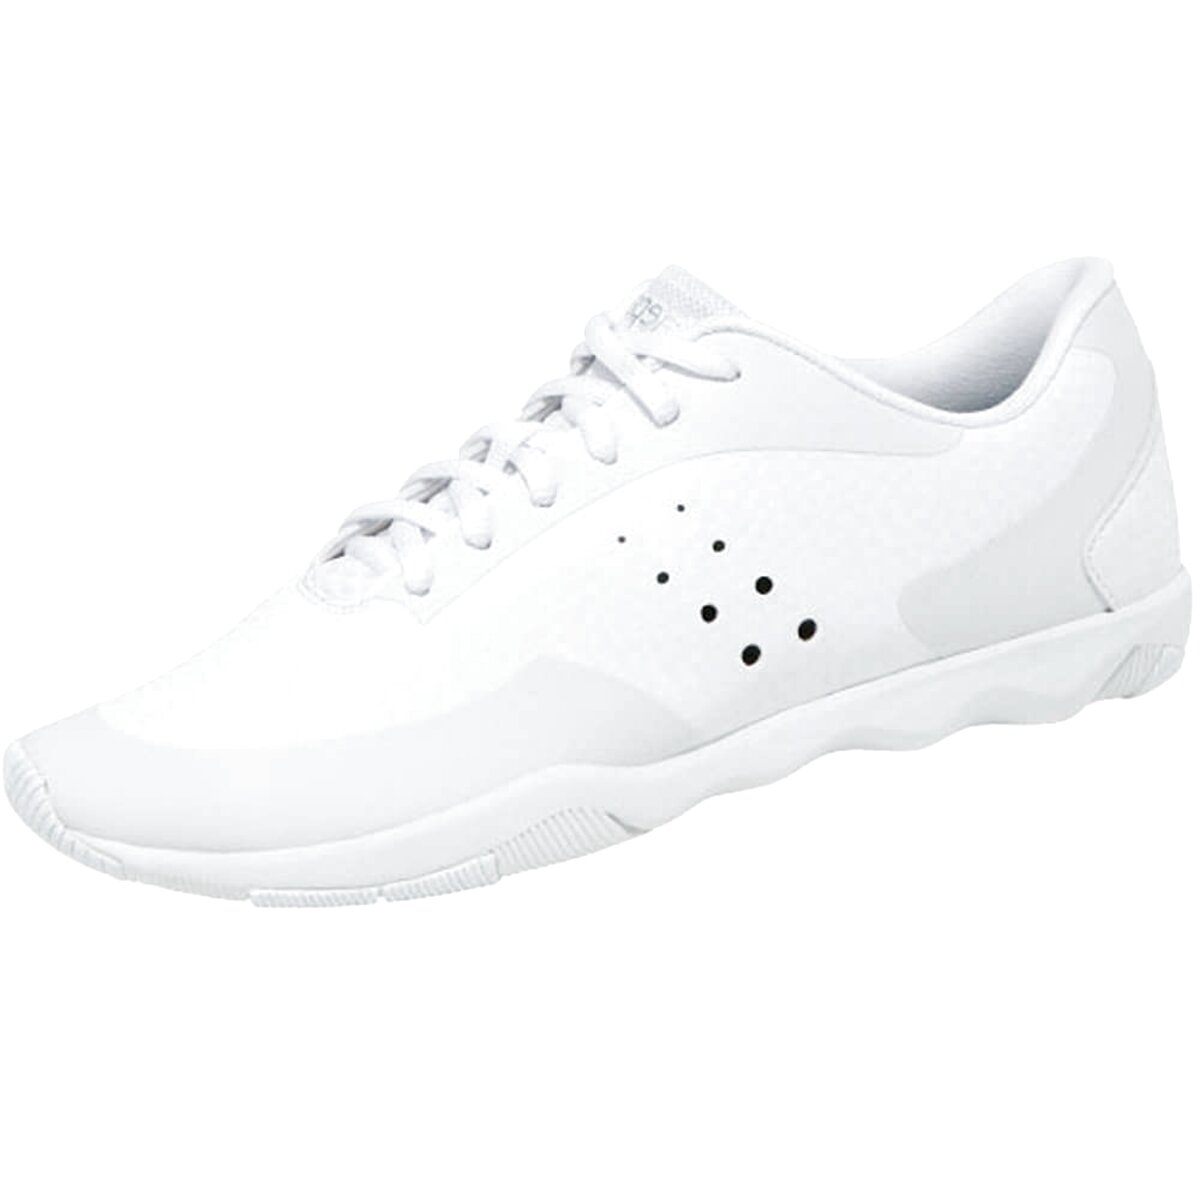 Kaepa Cheer Shoes for sale in UK View 48 bargains